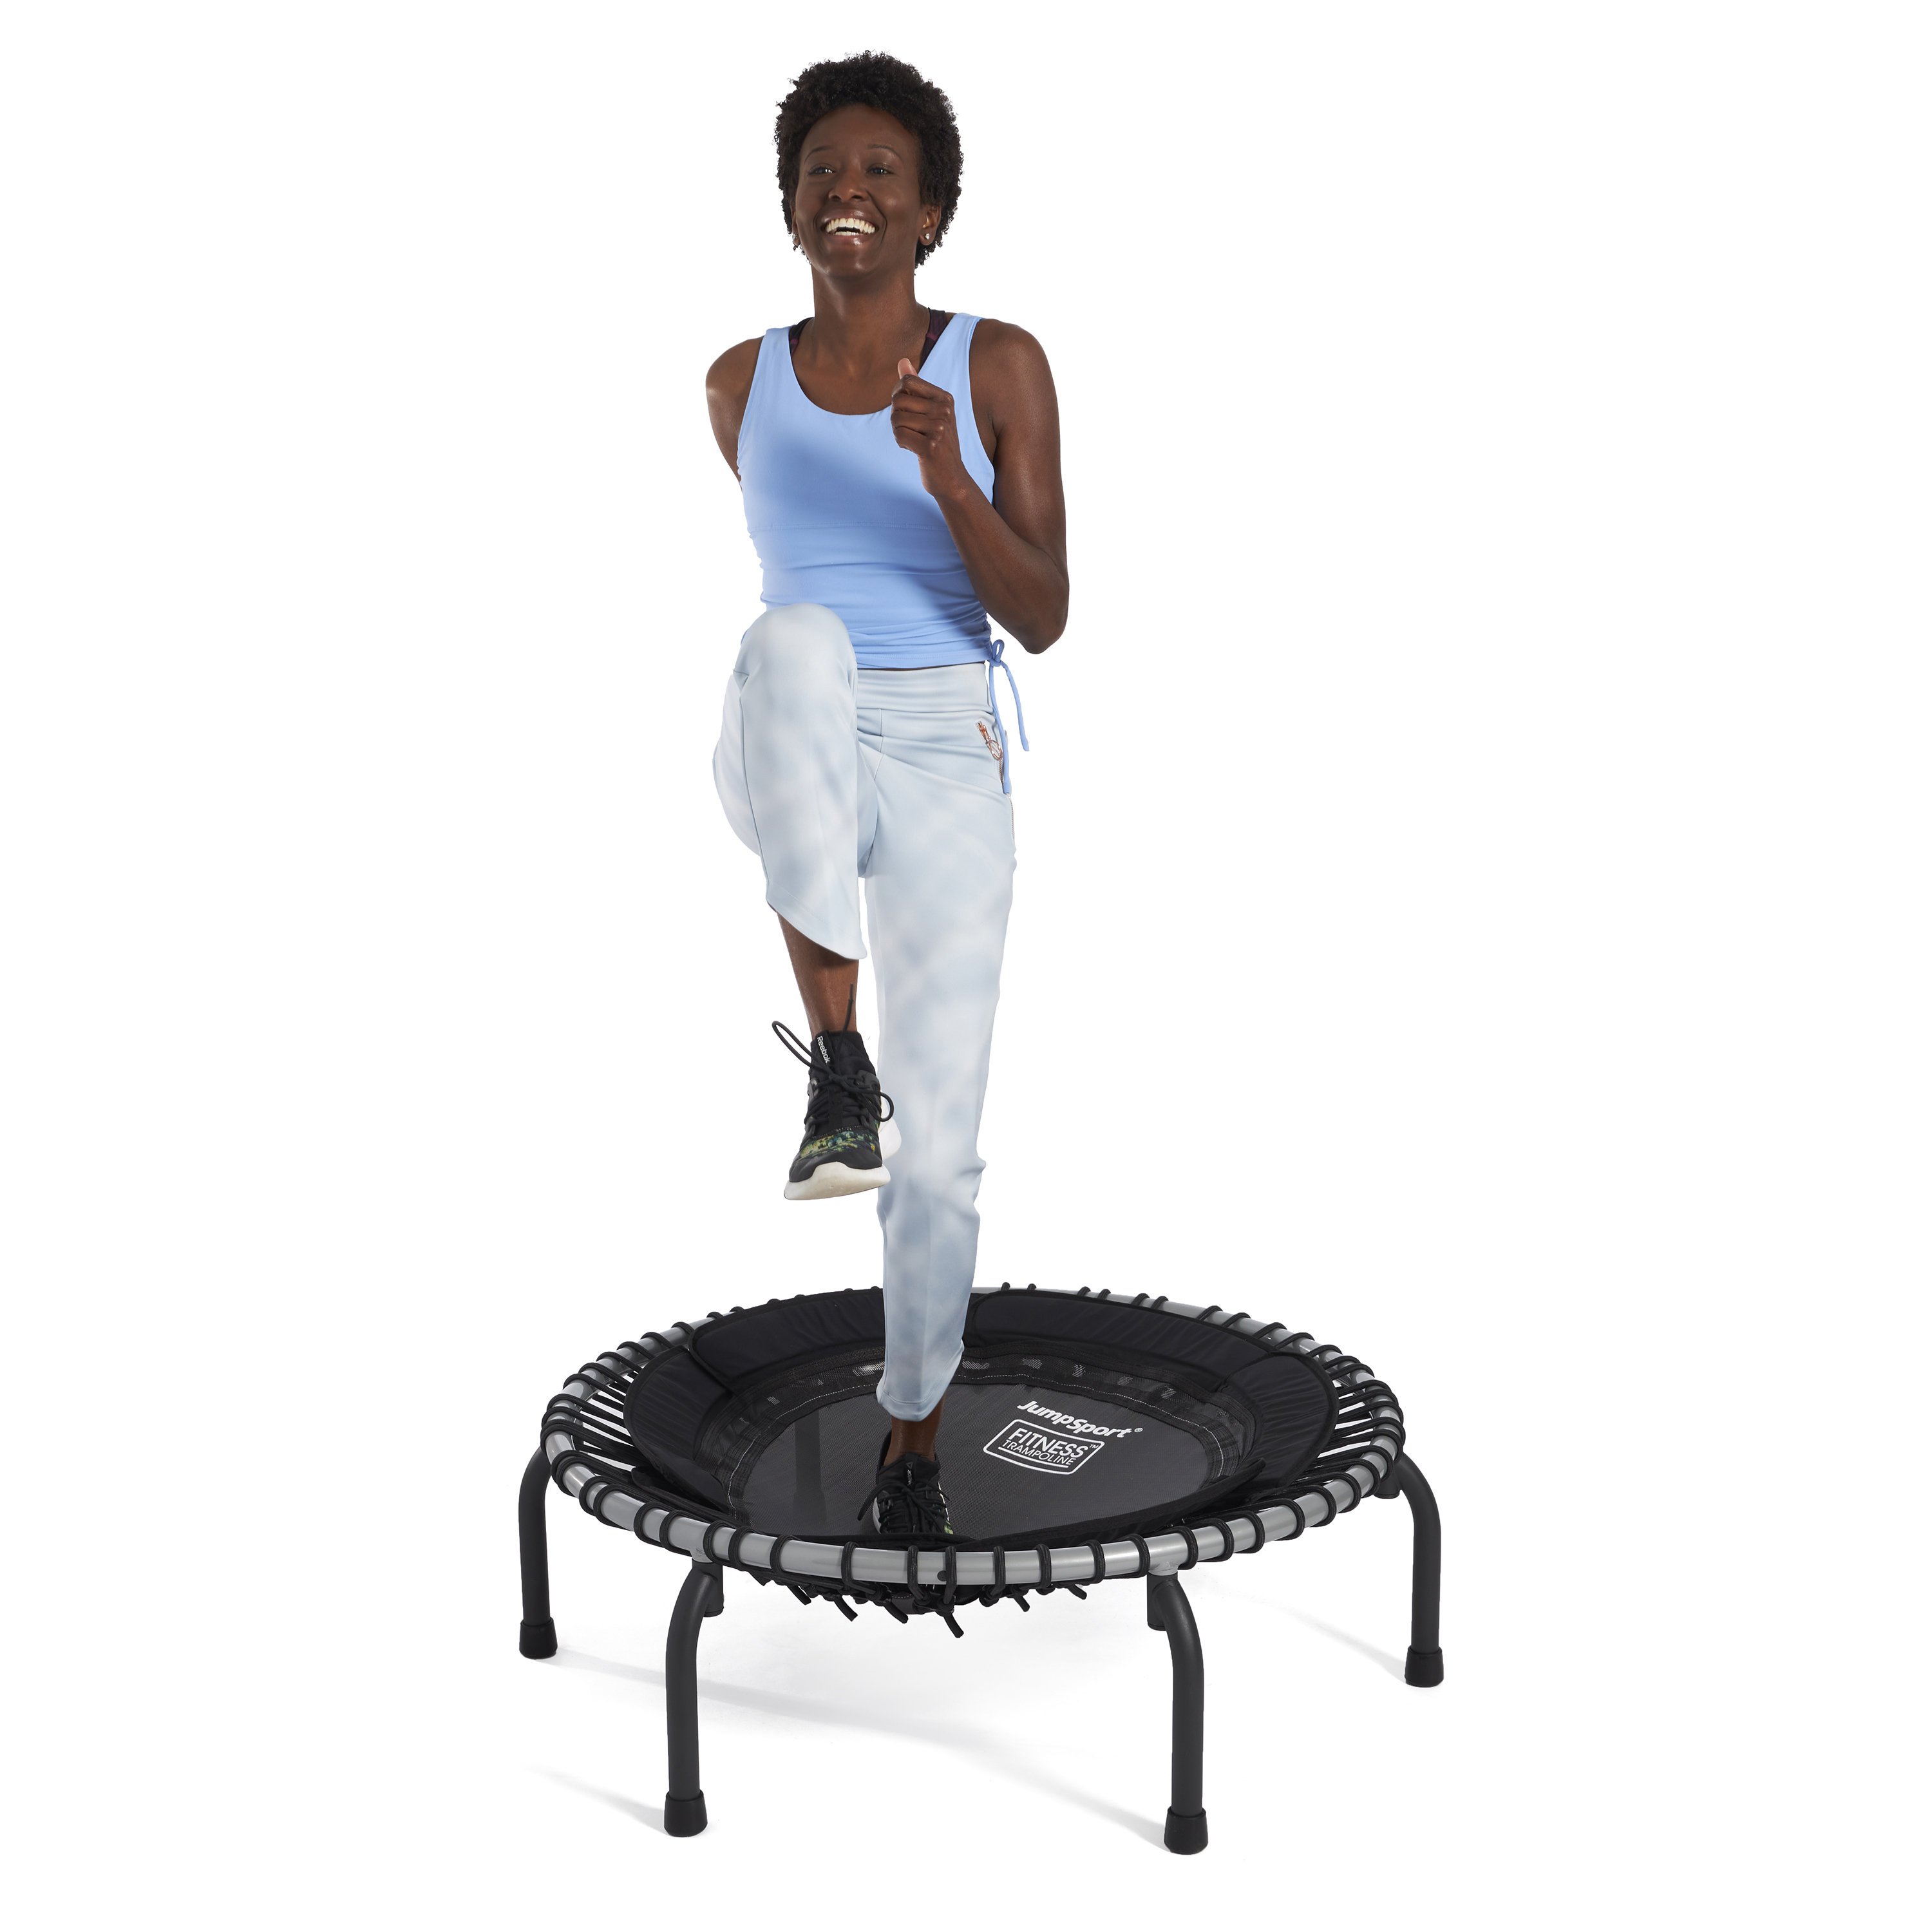 JumpSport 370 Home Gym 39 Heavy Duty Fitness Trampoline with 4-In